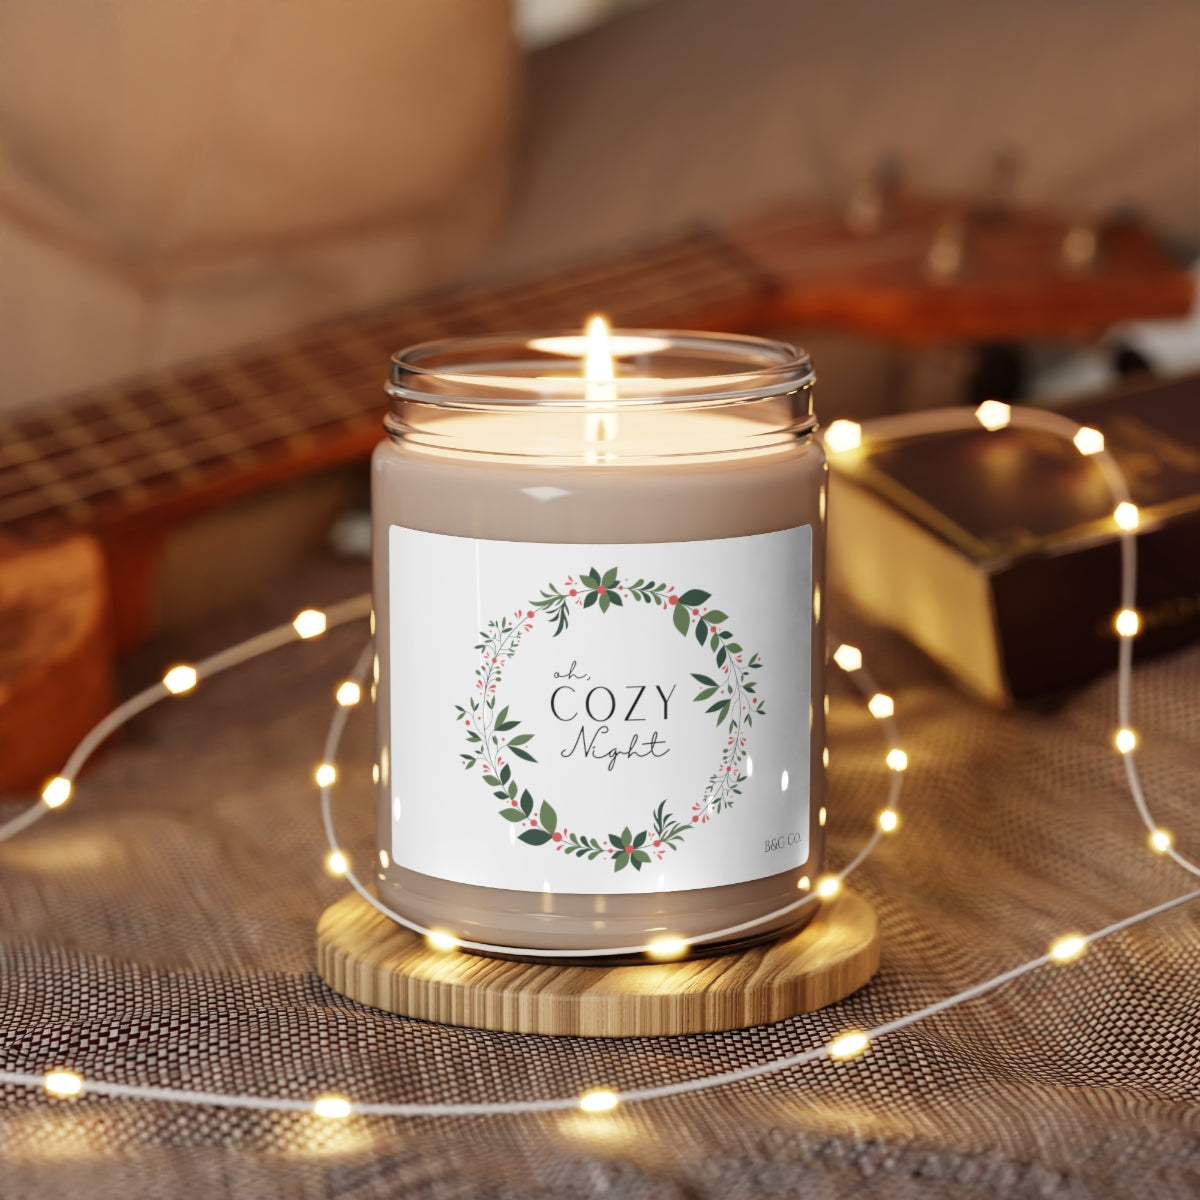 Oh, Cozy Night Scented Soy Candle, 9oz